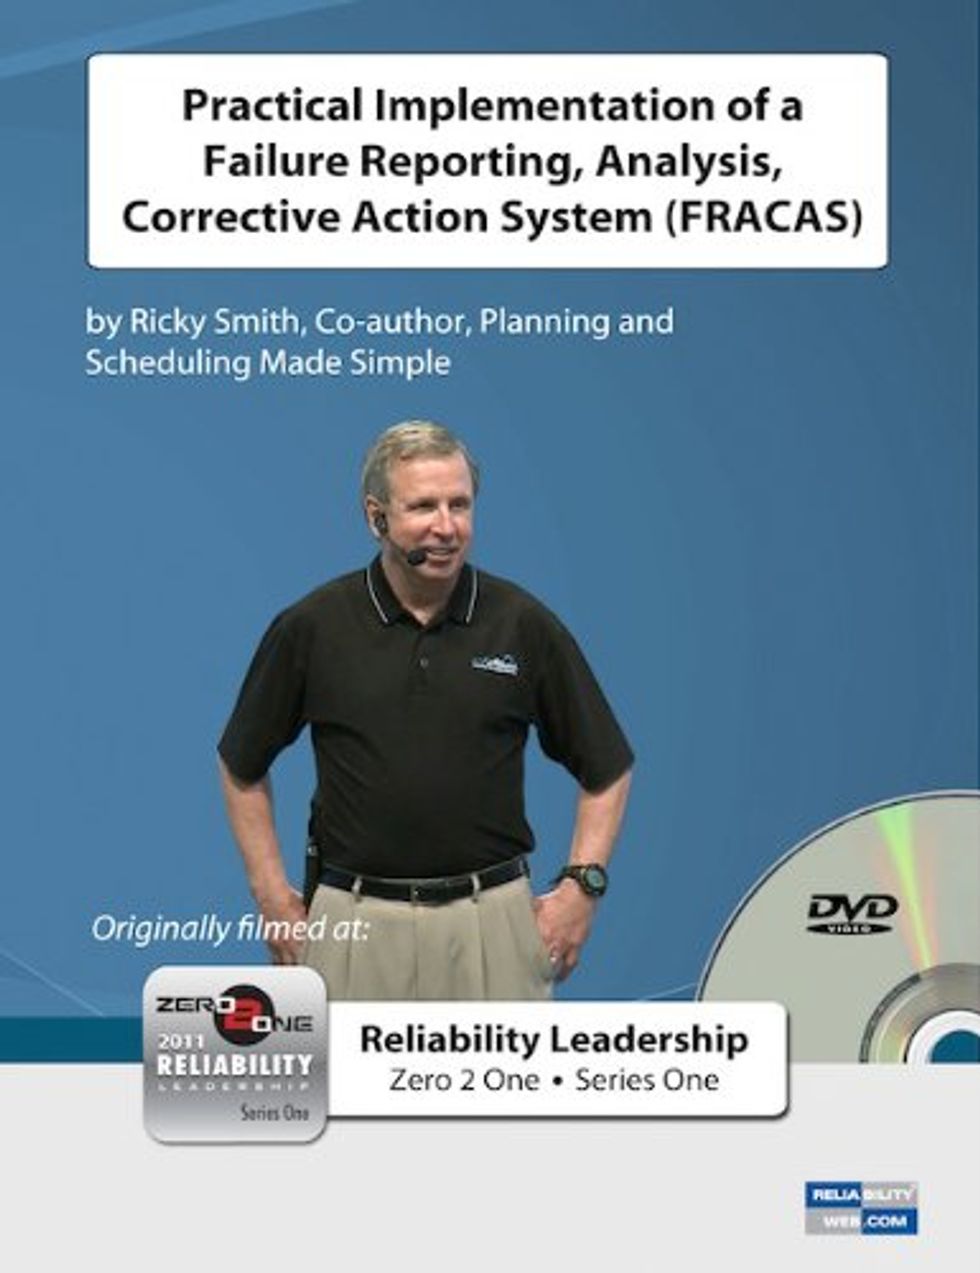  Practical Implementation of a Failure Reporting, Analysis, Corrective Action System (FRACAS) (DVD) 